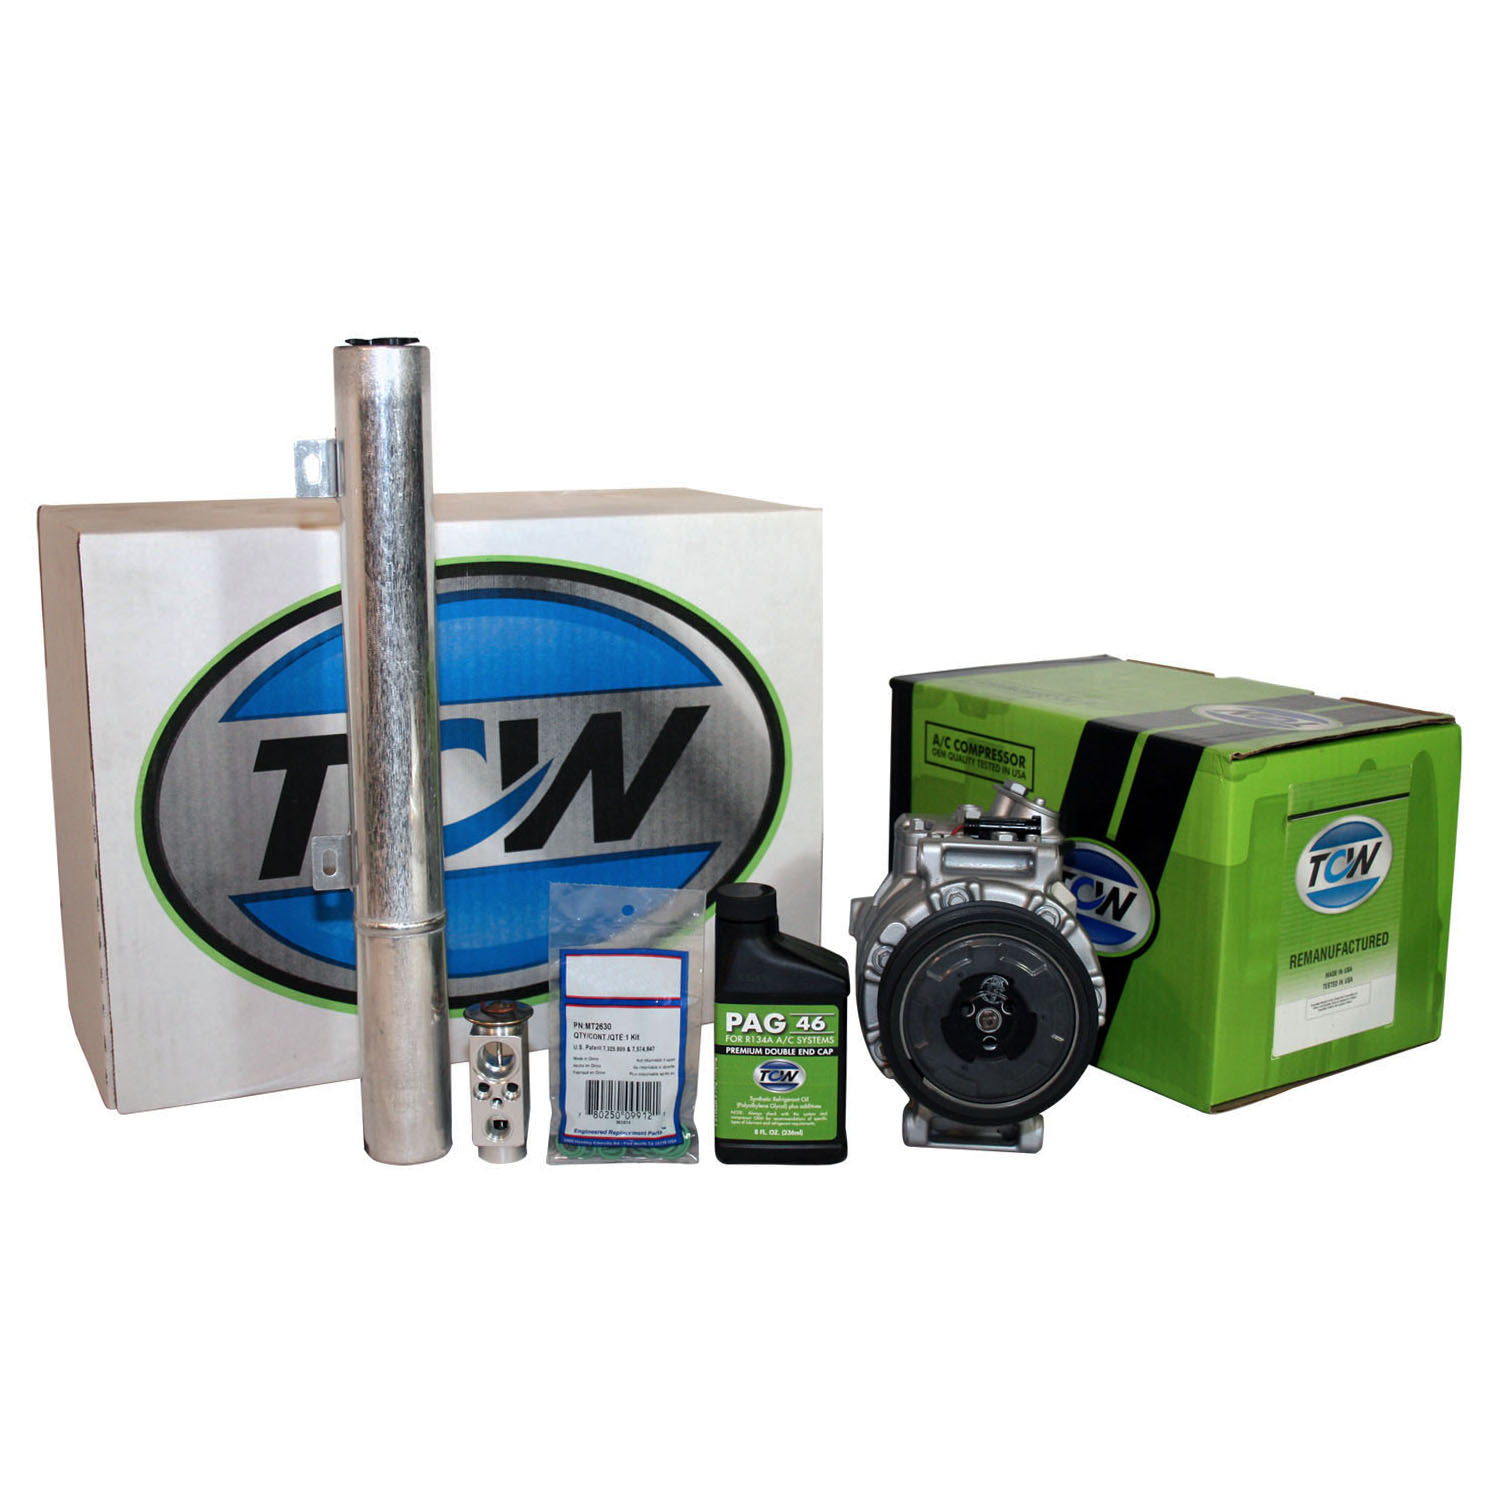 TCW Vehicle A/C Kit K1000417R Remanufactured Product Image field_60b6a13a6e67c